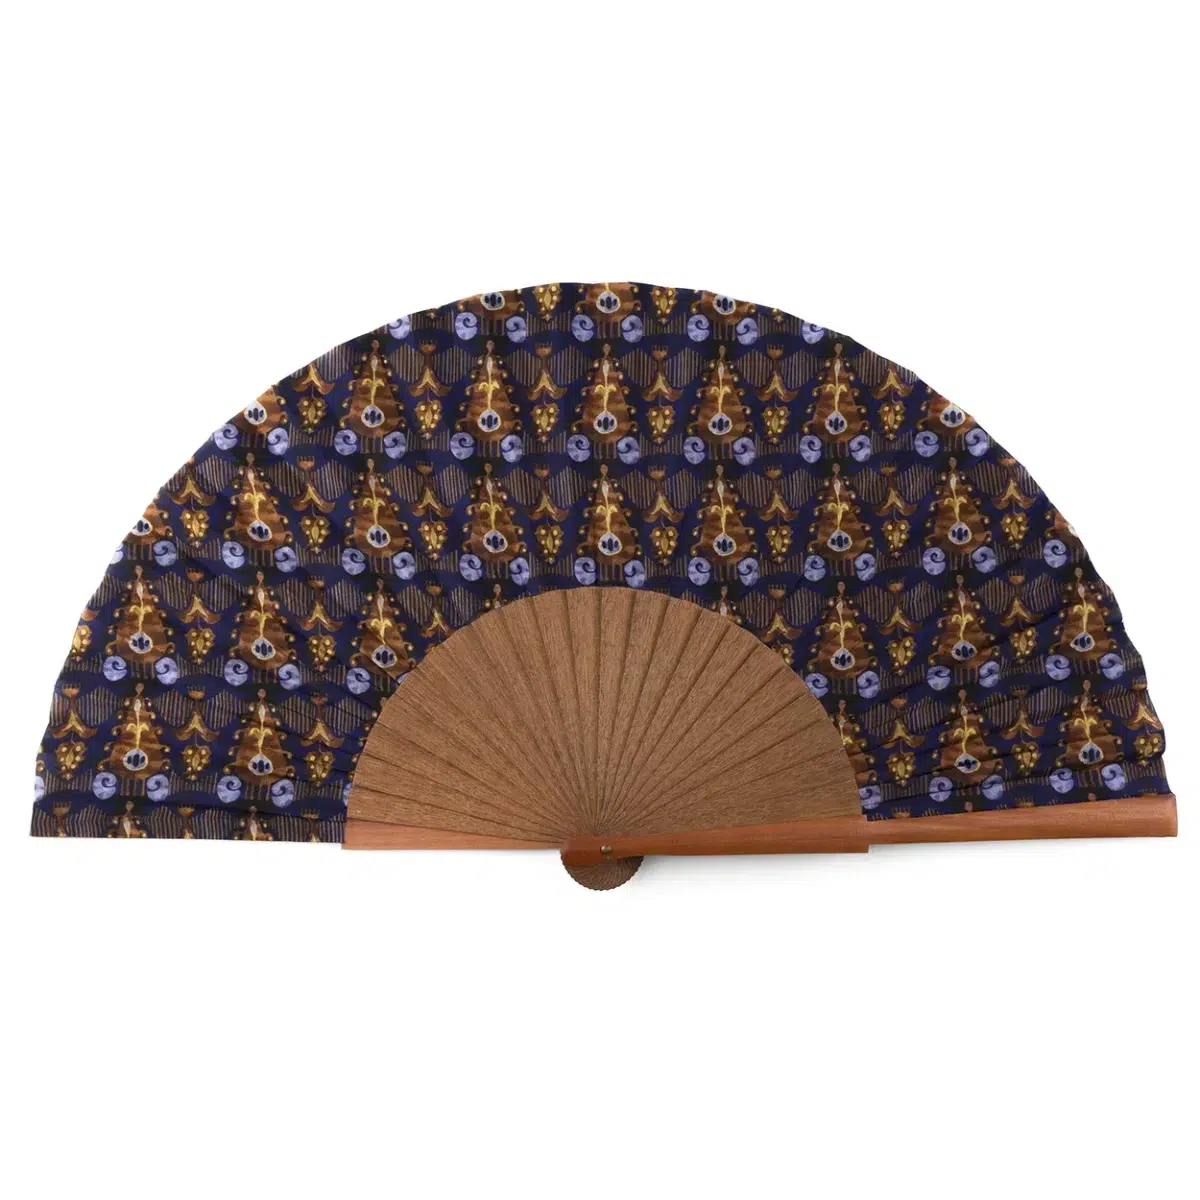 Handcrafted Fan with Blue and Brown Print Inspired by Indonesian Culture.